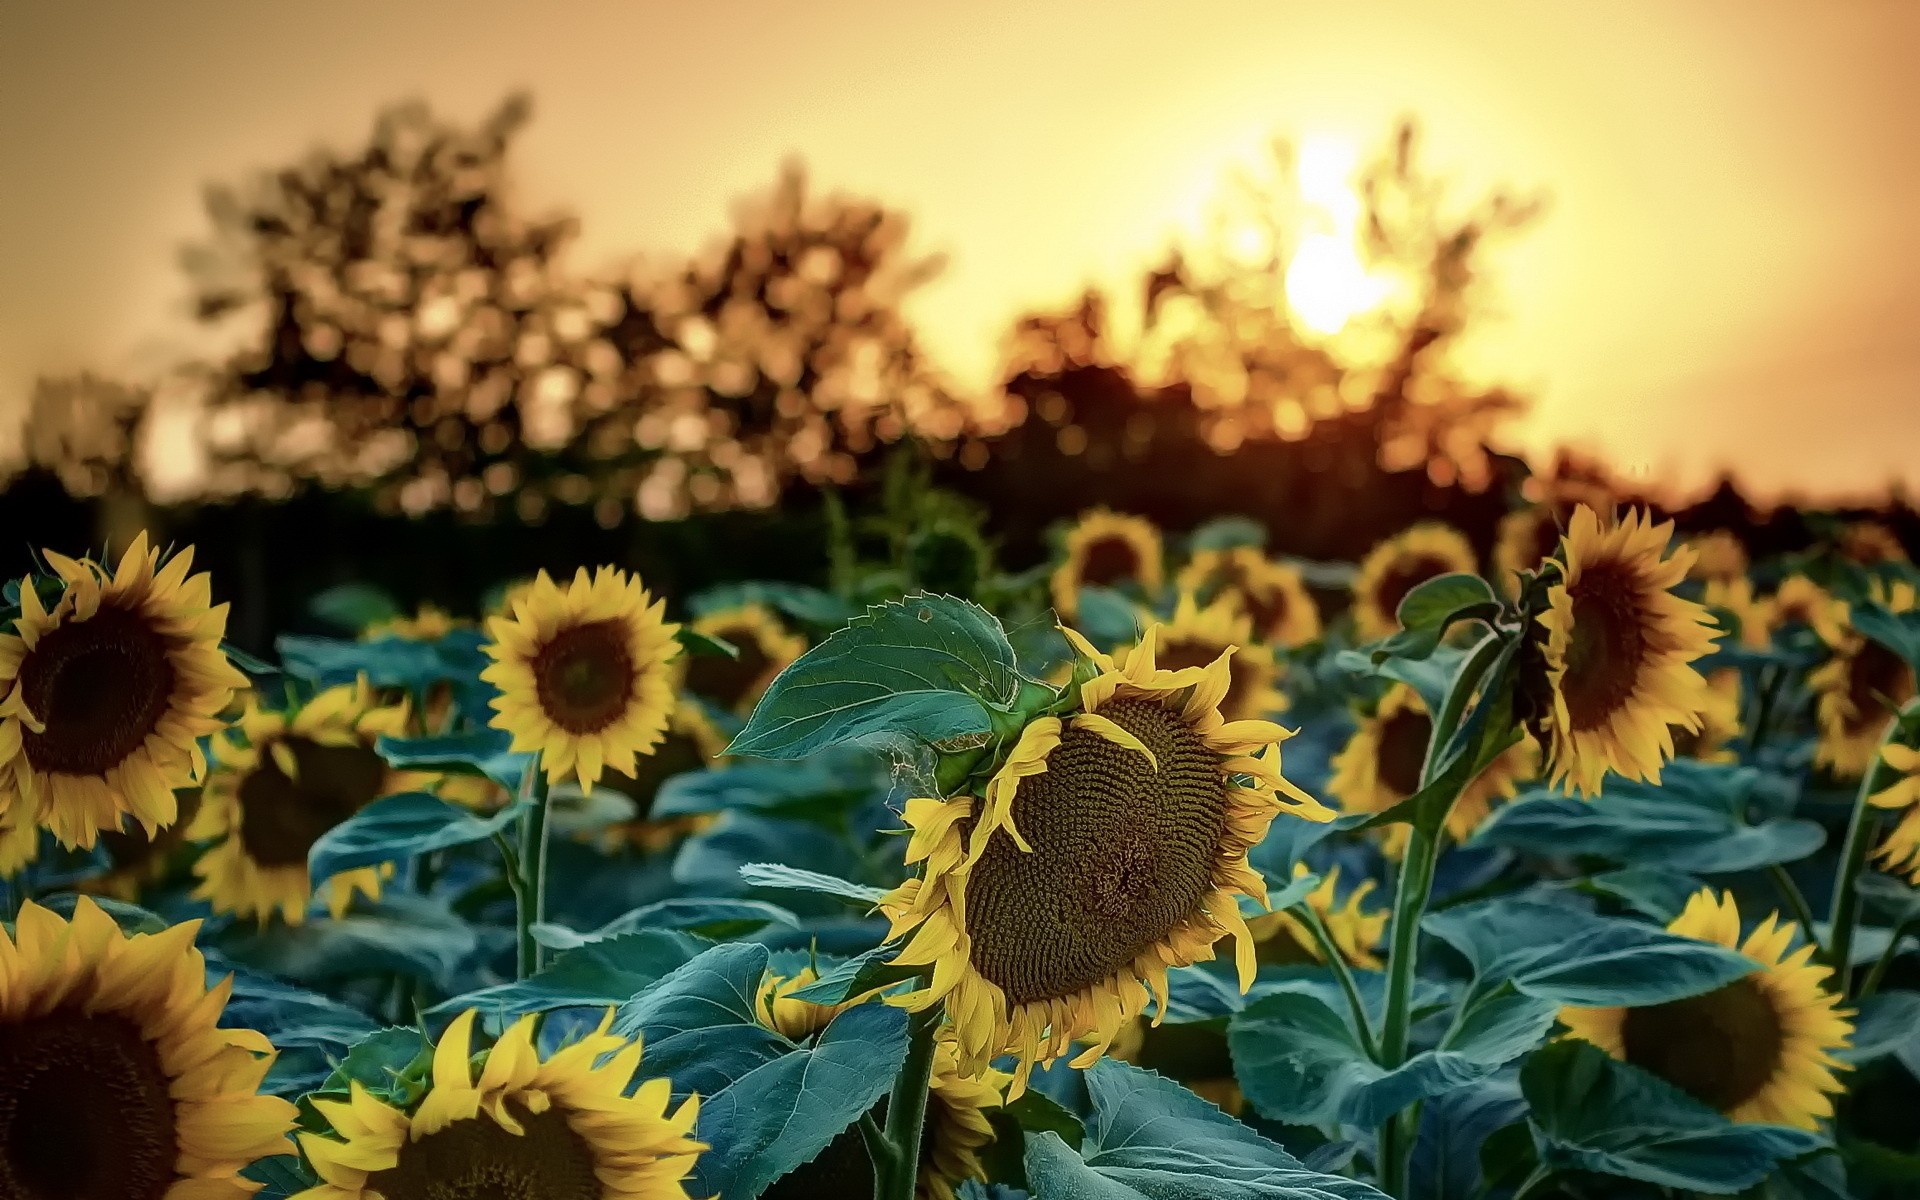 General 1920x1200 sunflowers sunlight nature flowers bokeh plants outdoors yellow flowers leaves